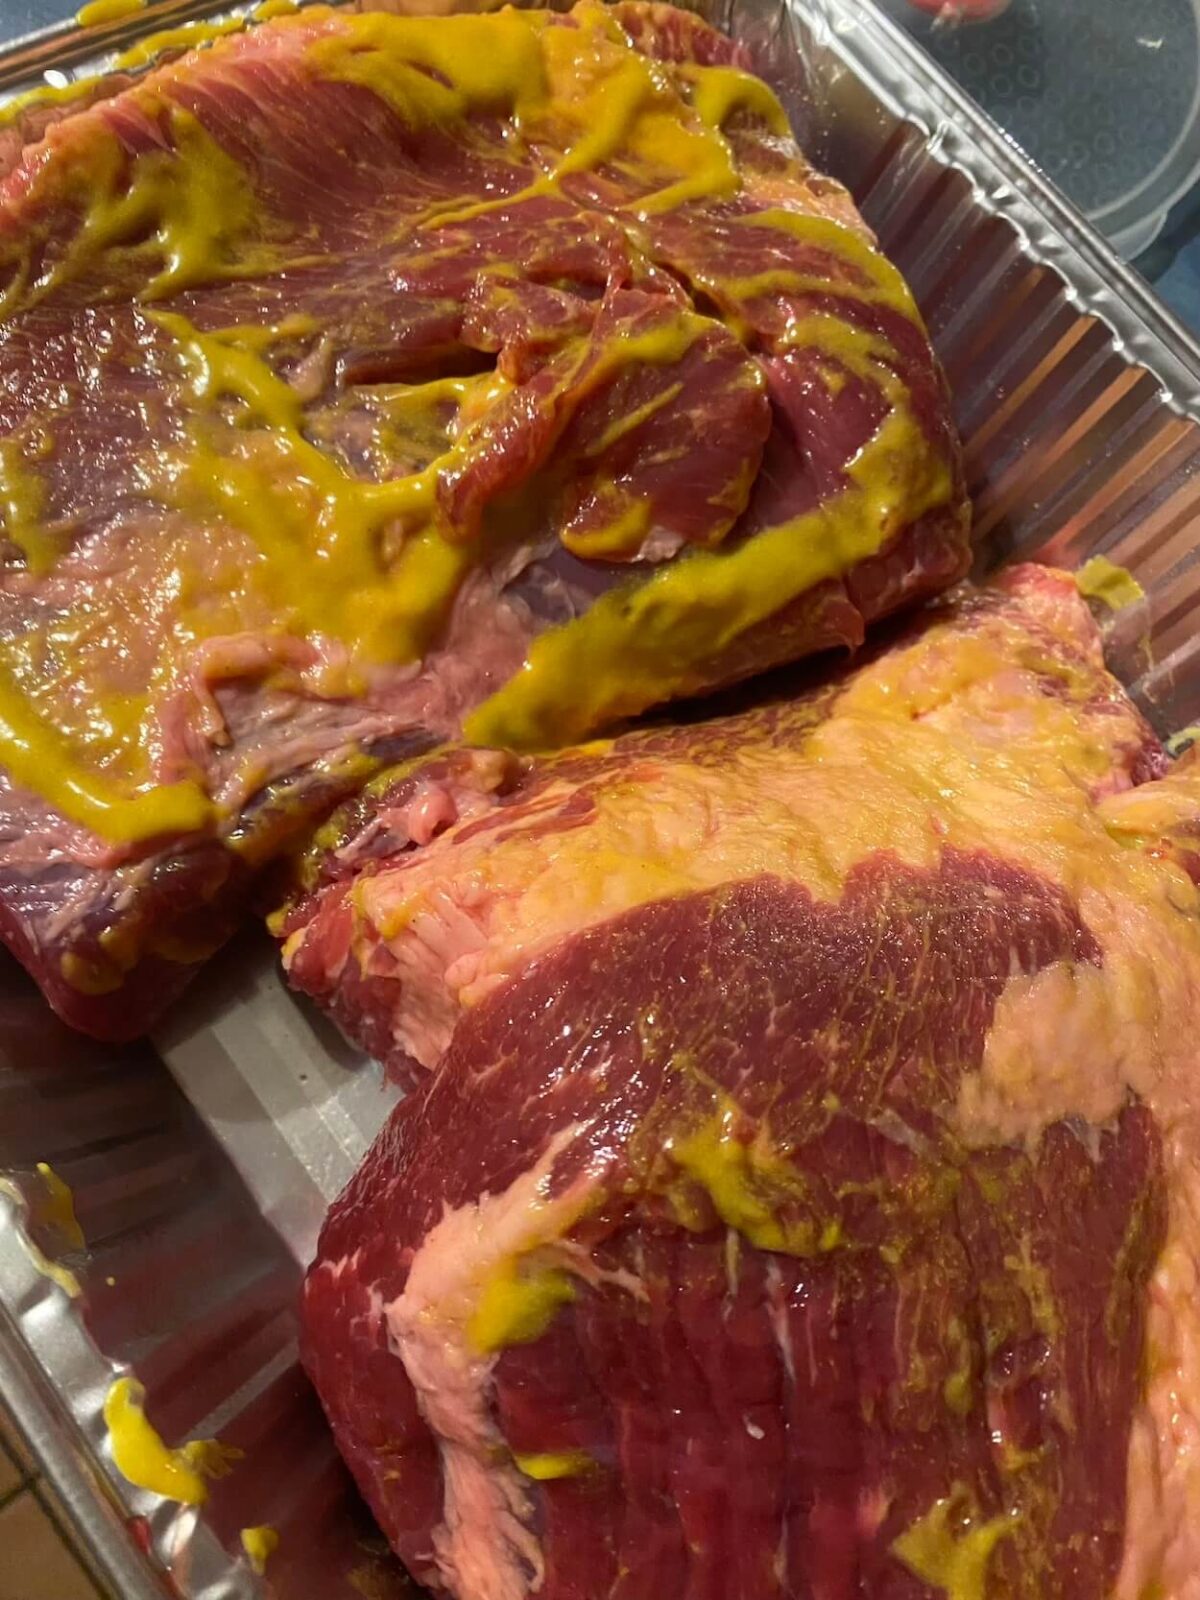 two beef brisket with mustard rubbed on meat surface.